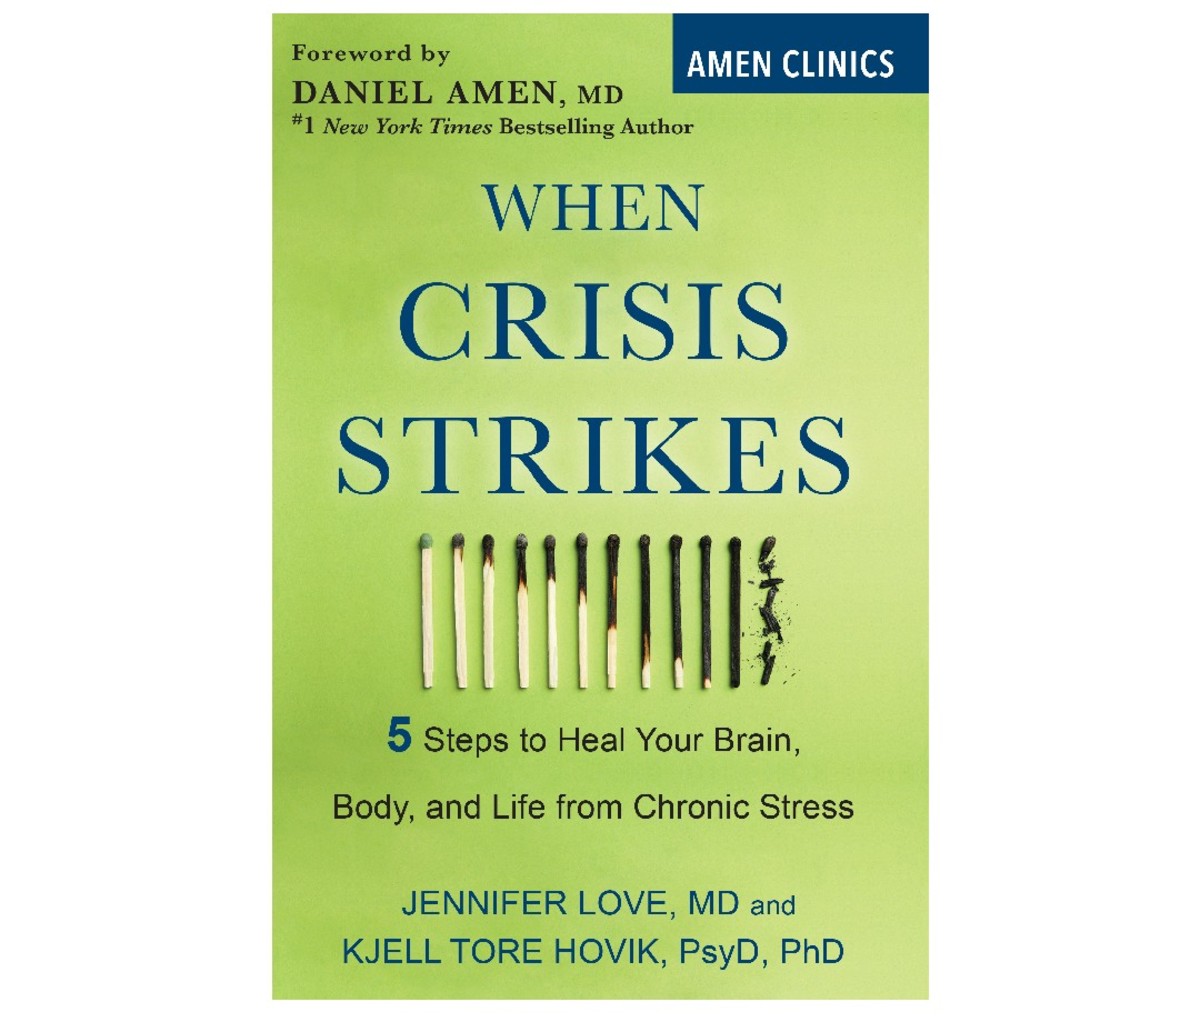 When the Crisis Strikes: 5 Steps to Healing Your Brain, Body, and Life of Chronic Stress by Jennifer Love, MD and Kjell Tove Hovik, PhD